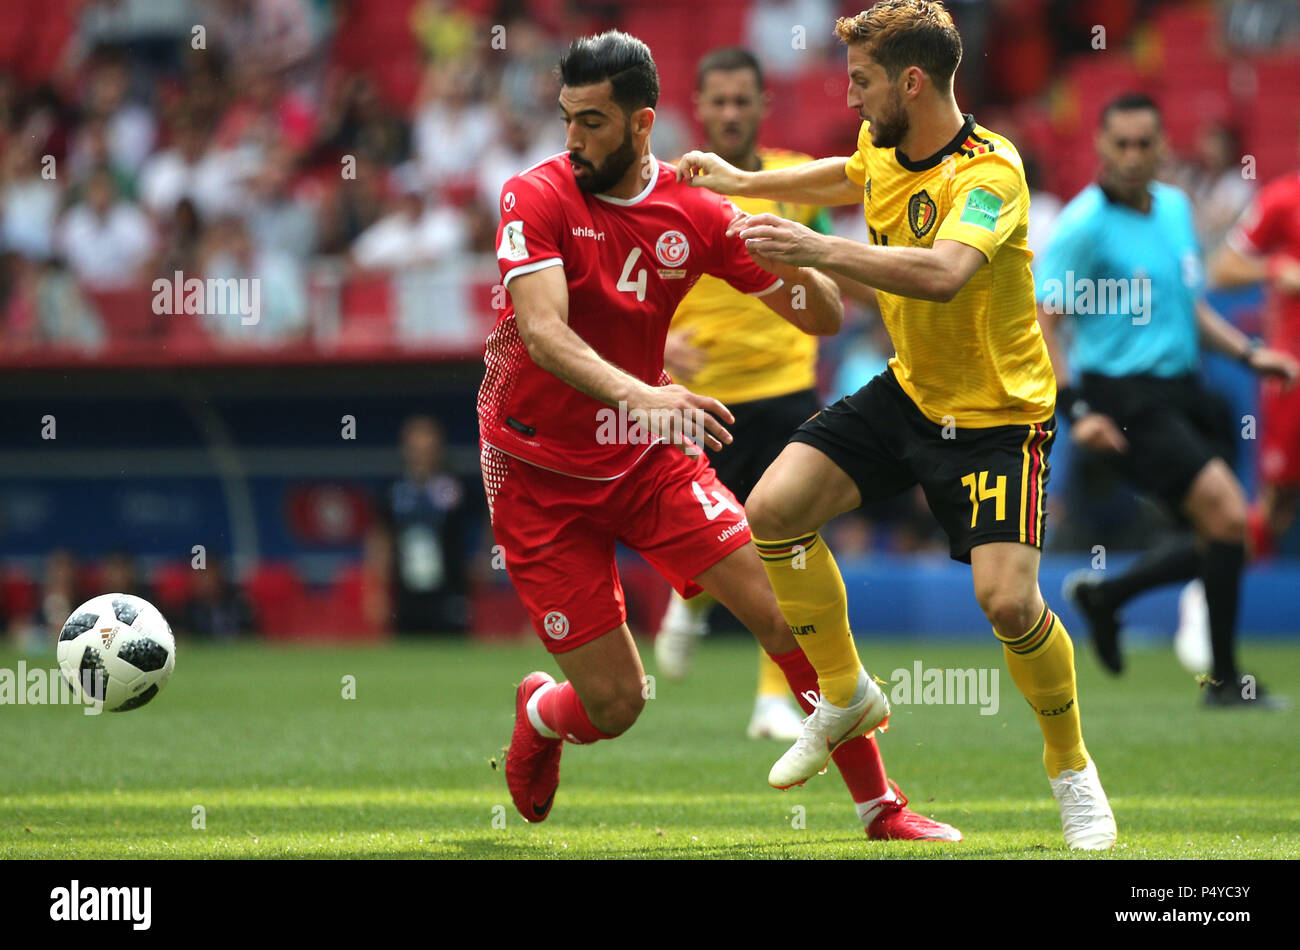 Moscow, Russian. 23rd June, 2018. 23.06.2018. Moscow, Russian:YASSINE MERIAH, Dries Mertens in action during the Fifa World Cup Russia 2018, Group C, football match between BELGIUM V TUNISIA in SPARTAK STADIUM in Moscow Stadium Credit: Independent Photo Agency/Alamy Live News Stock Photo